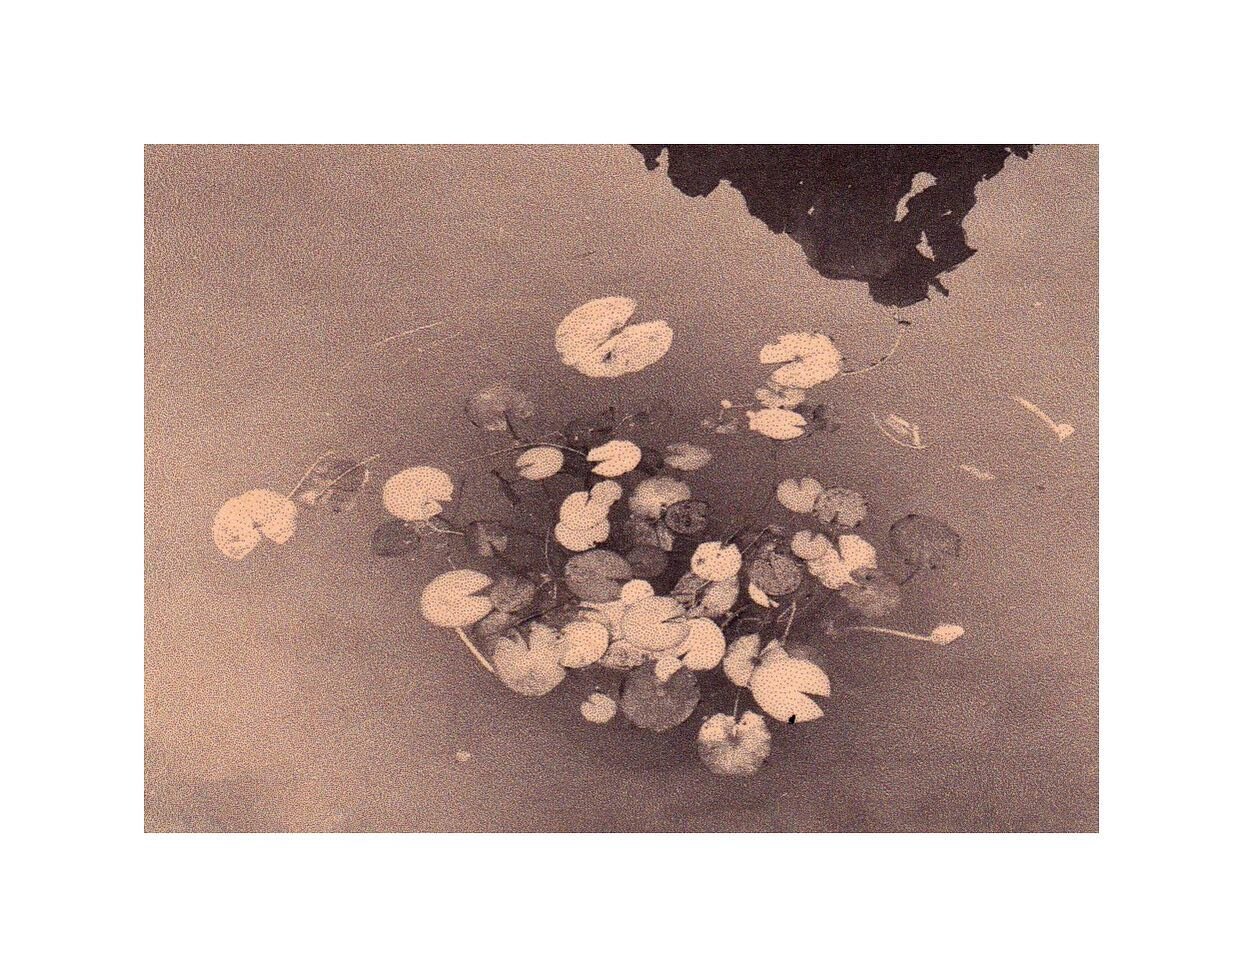 &ldquo;Lamenting the Earth&rdquo; 
Toned rice paper prints
.
.
.
.
.
.
#alternativeprocesses #antiquated #antiquatedphotography #landscape #landscapephotography #landscapeart #melancholy #earth #poetry #fog #pond #lilypads #trees #prints #landscapelo